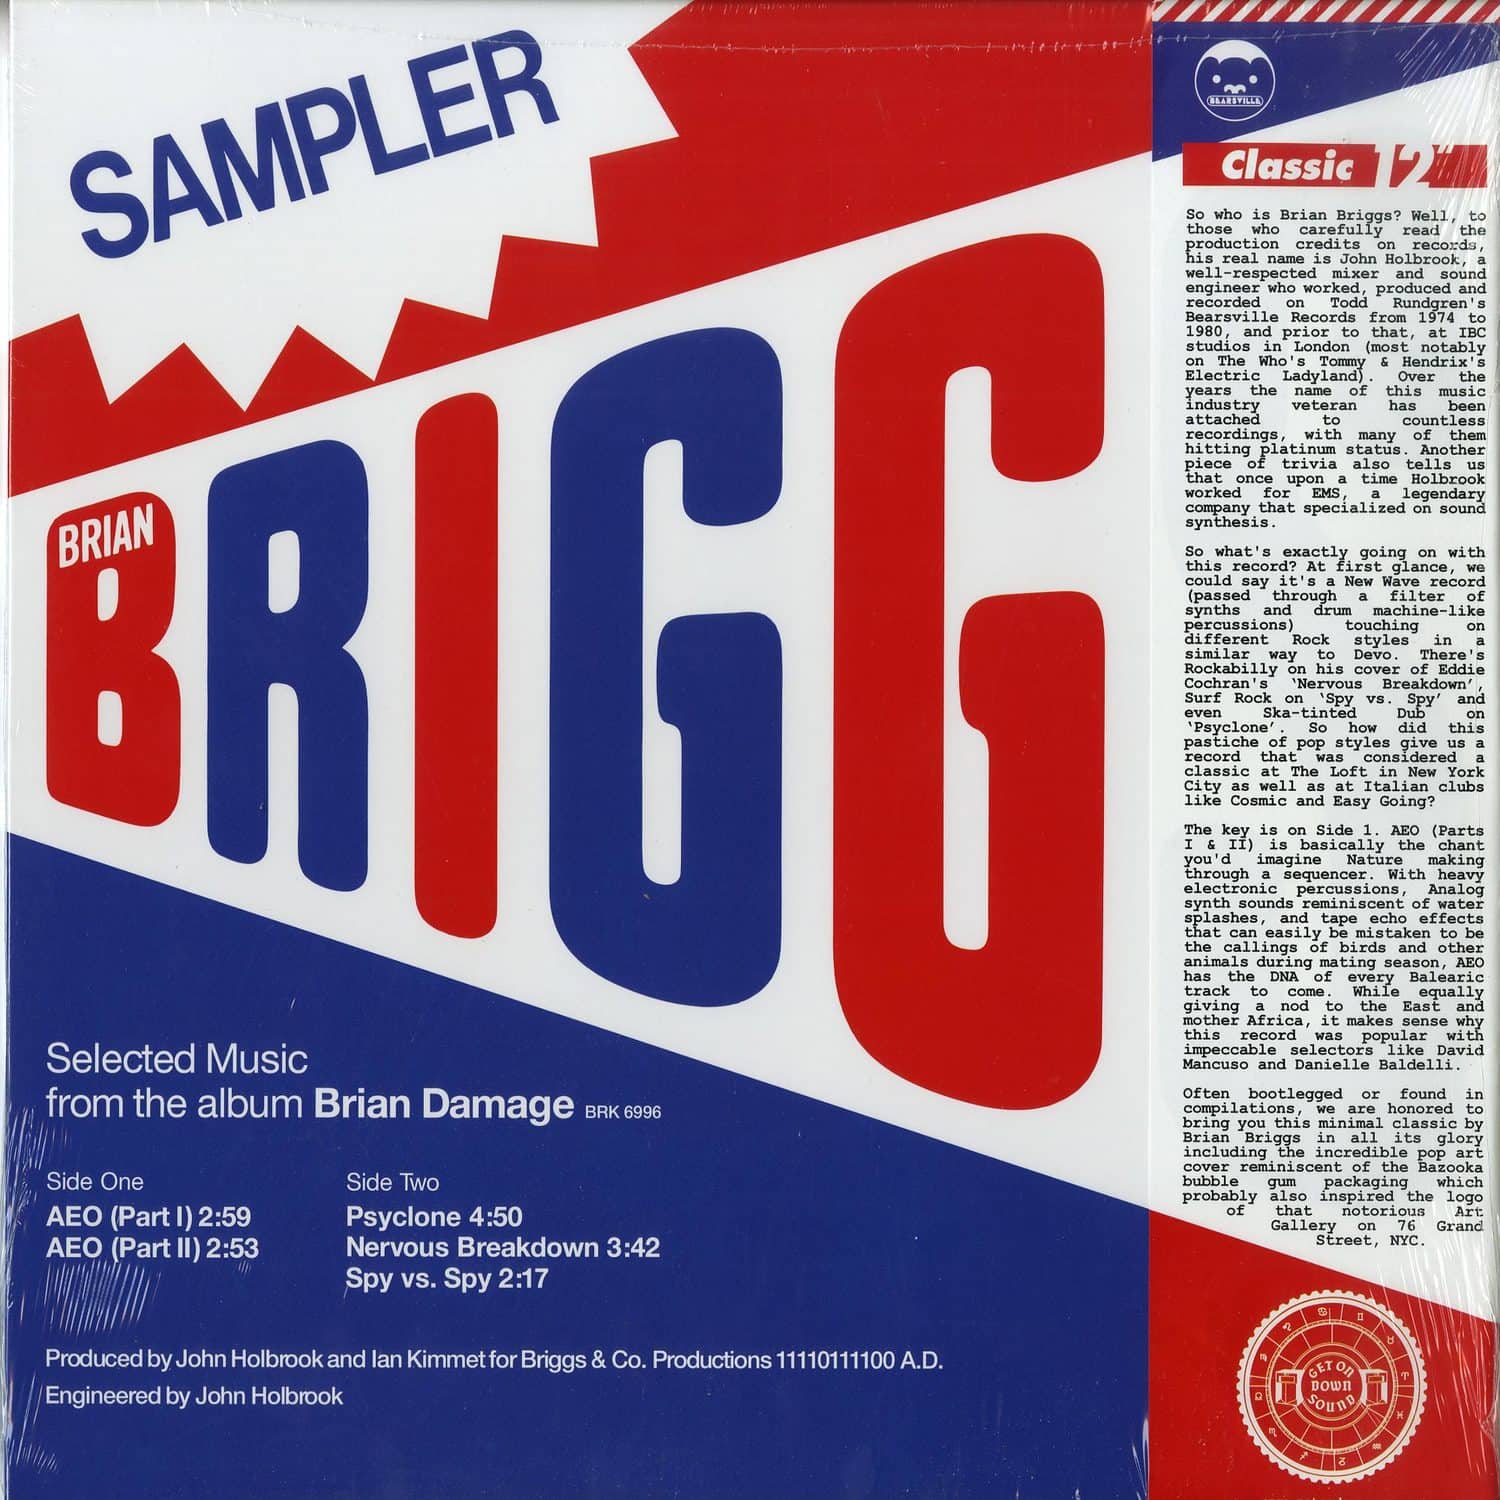 Brian Briggs - SELECTED MUSIC FROM THE ALBUM BRIAN DAMAGE